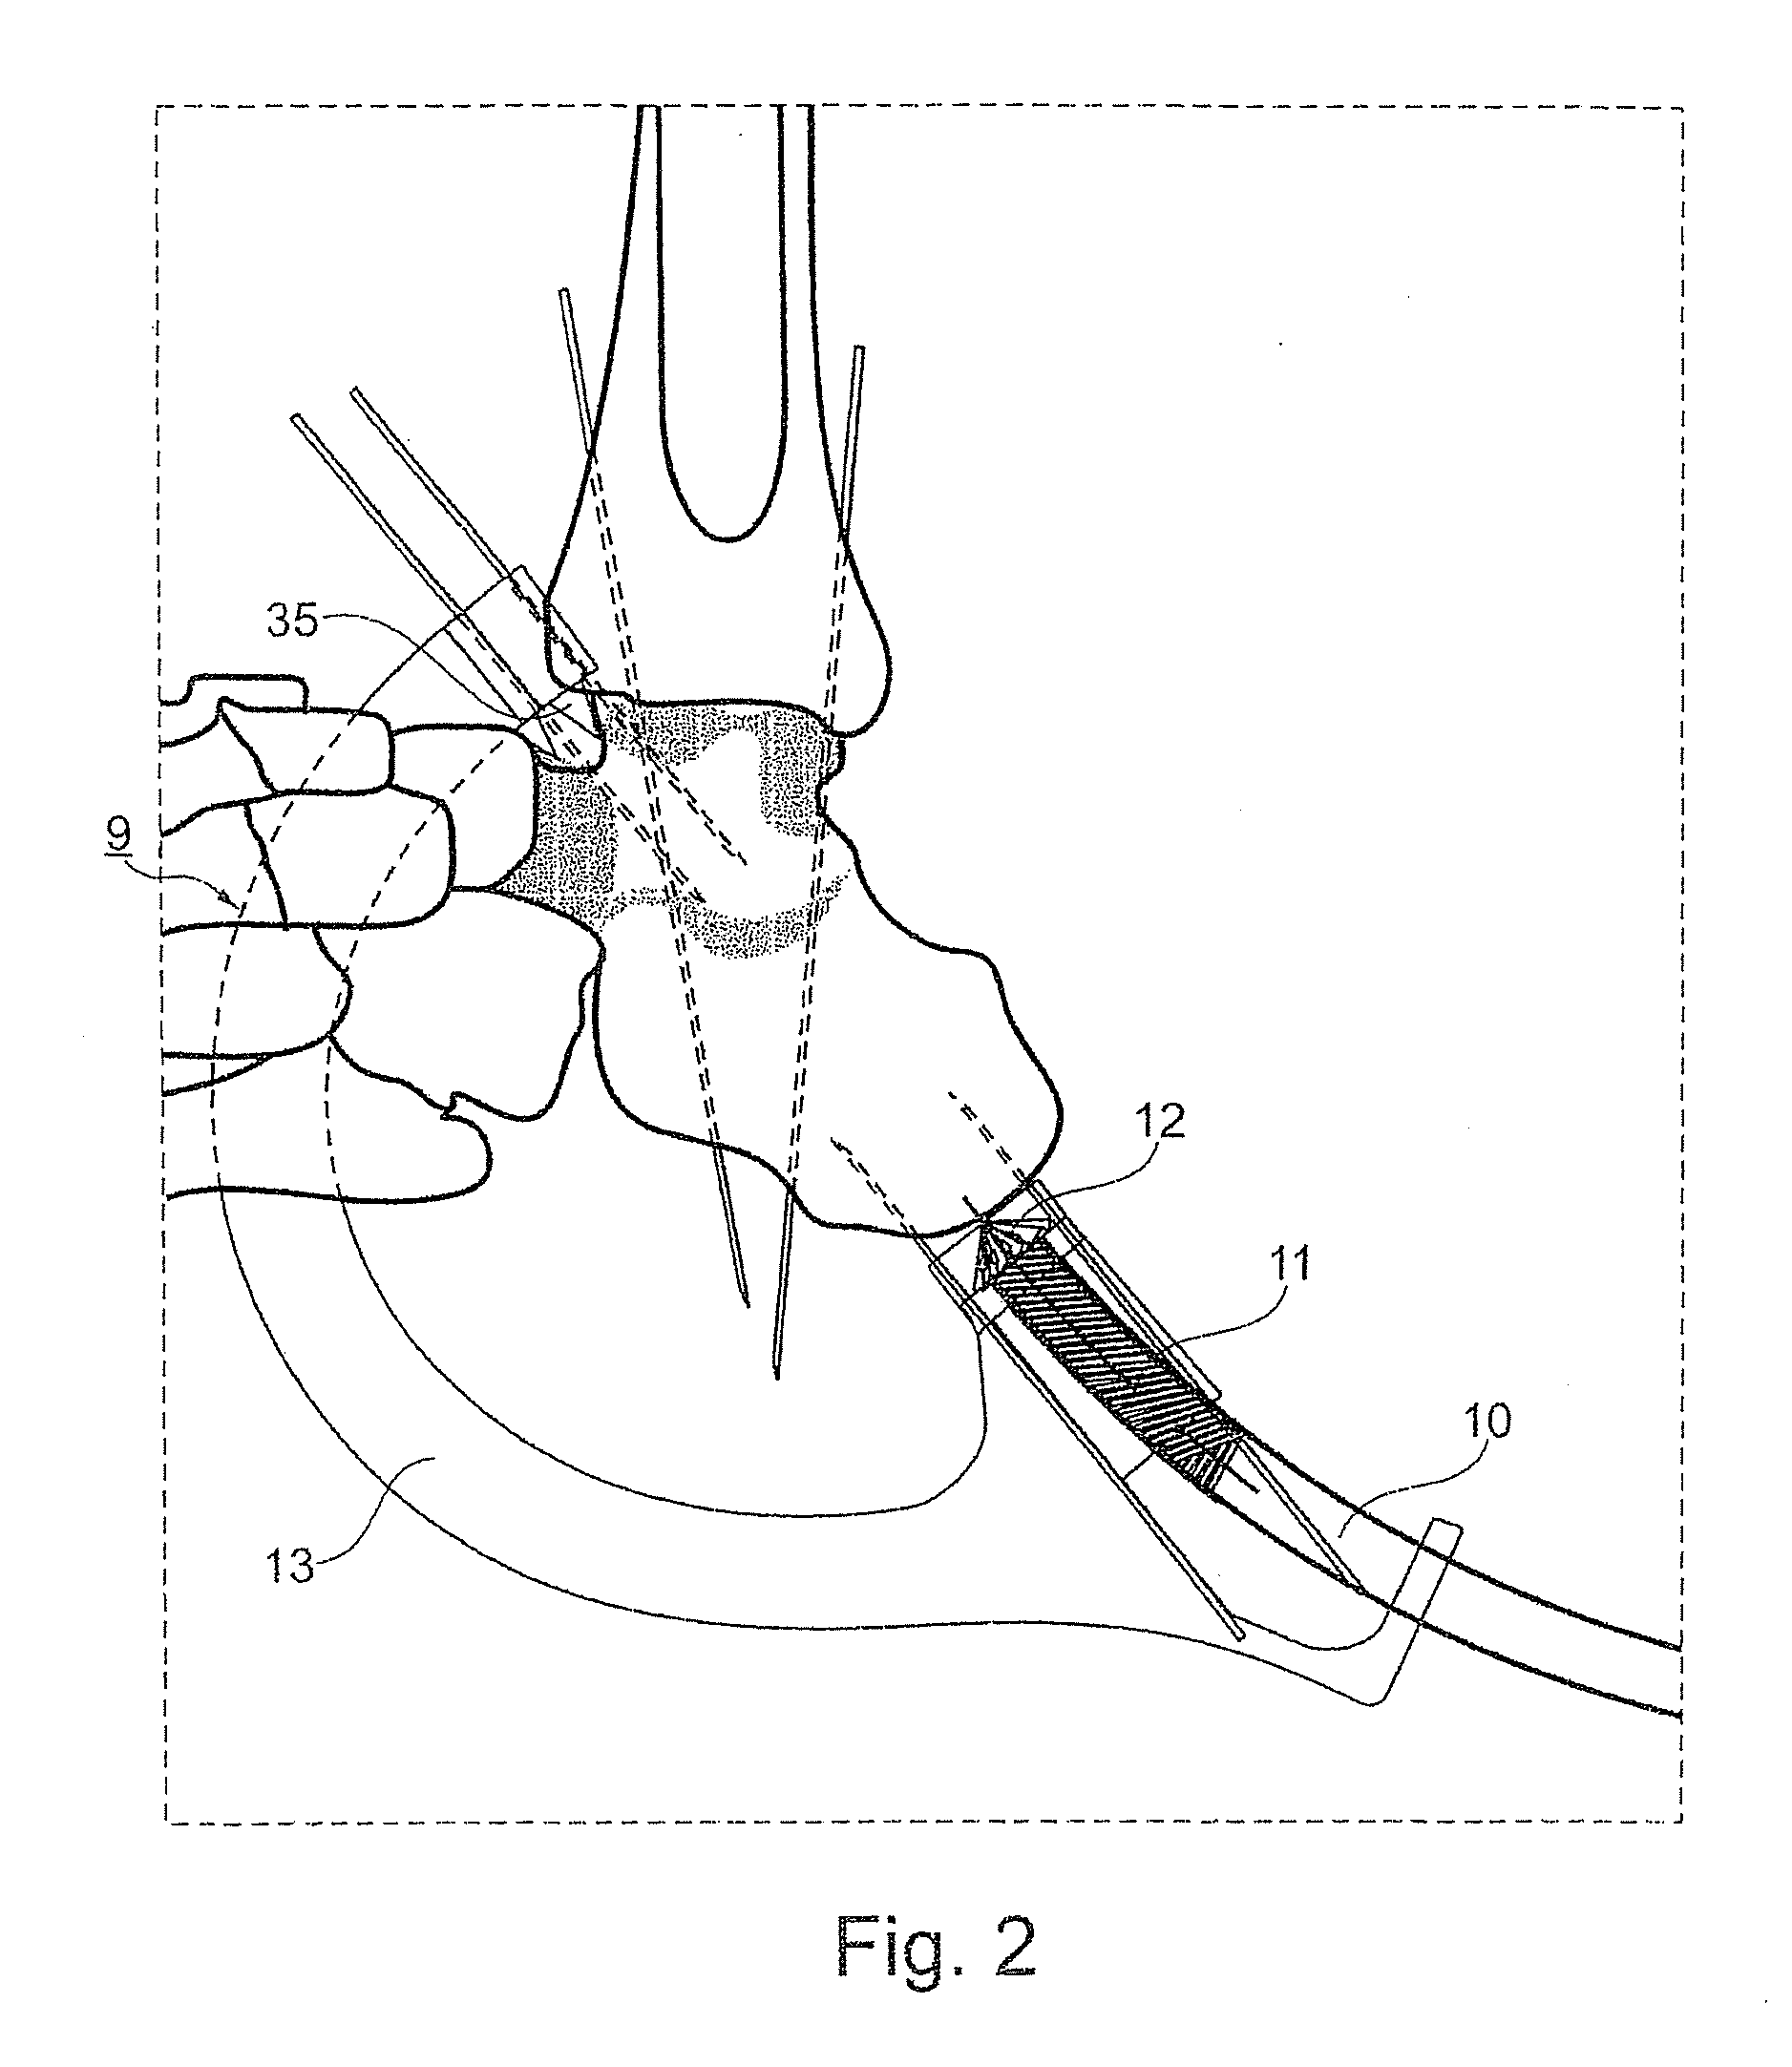 Device for forming a bore to facilitate insertion of an arcuate nail into a bone